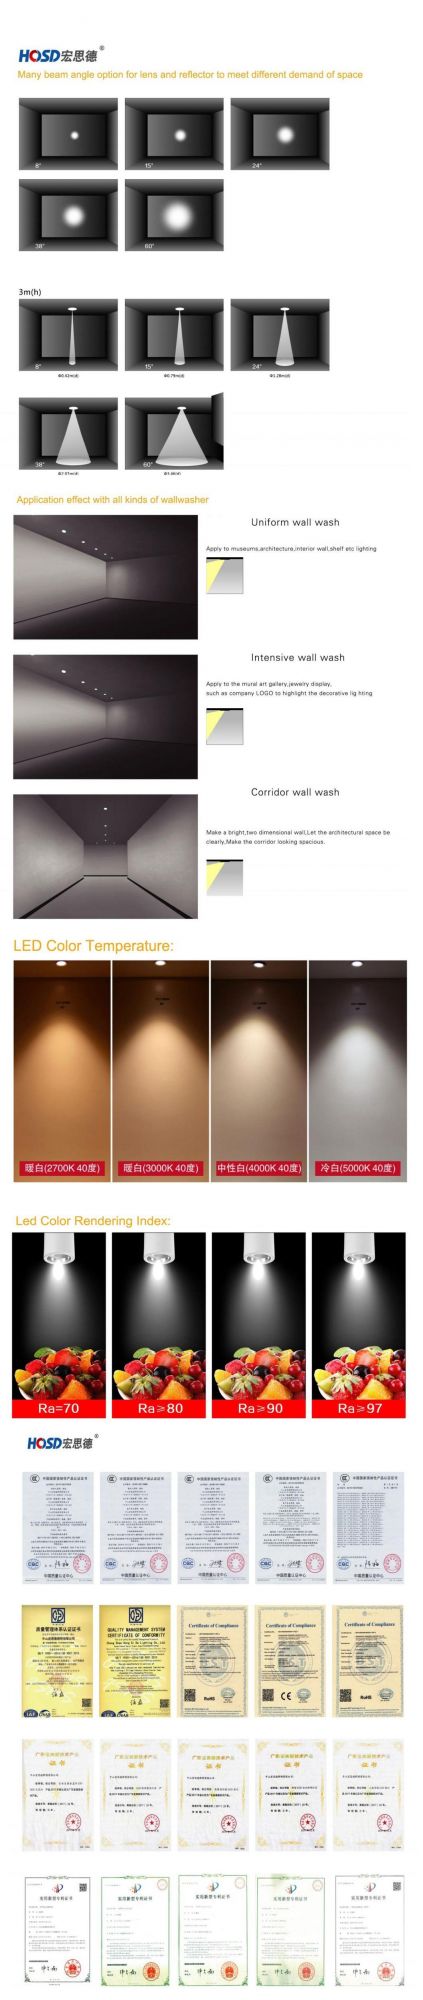 25W CE Europ 3phase Quality Ra>95 Bridgelux Osram COB Ceiling Spotlight LED Track Light for Shoes Clothes Chain Stores shopping Mall Gym Track Lighting Fixtures